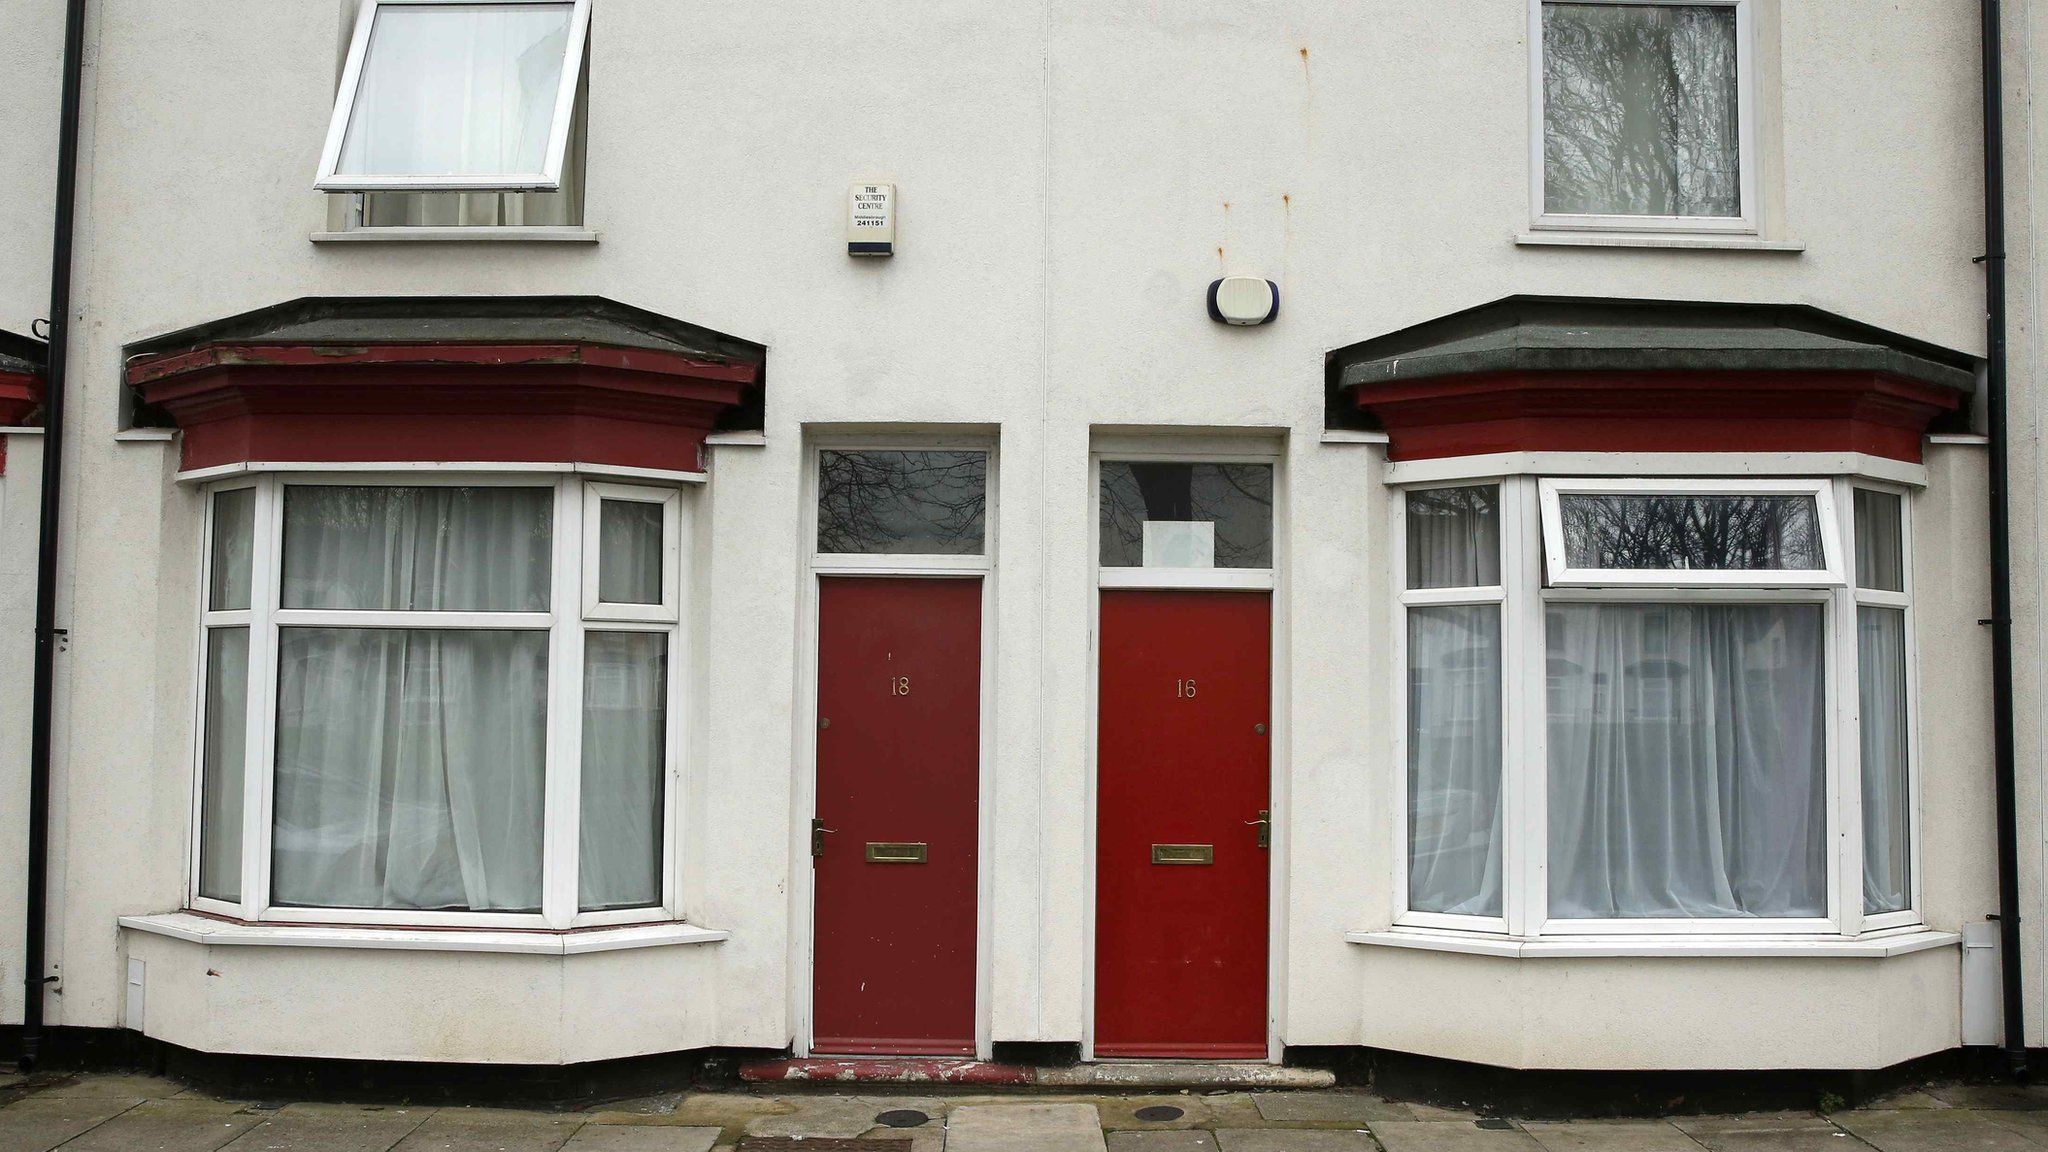 Homes with doors painted red